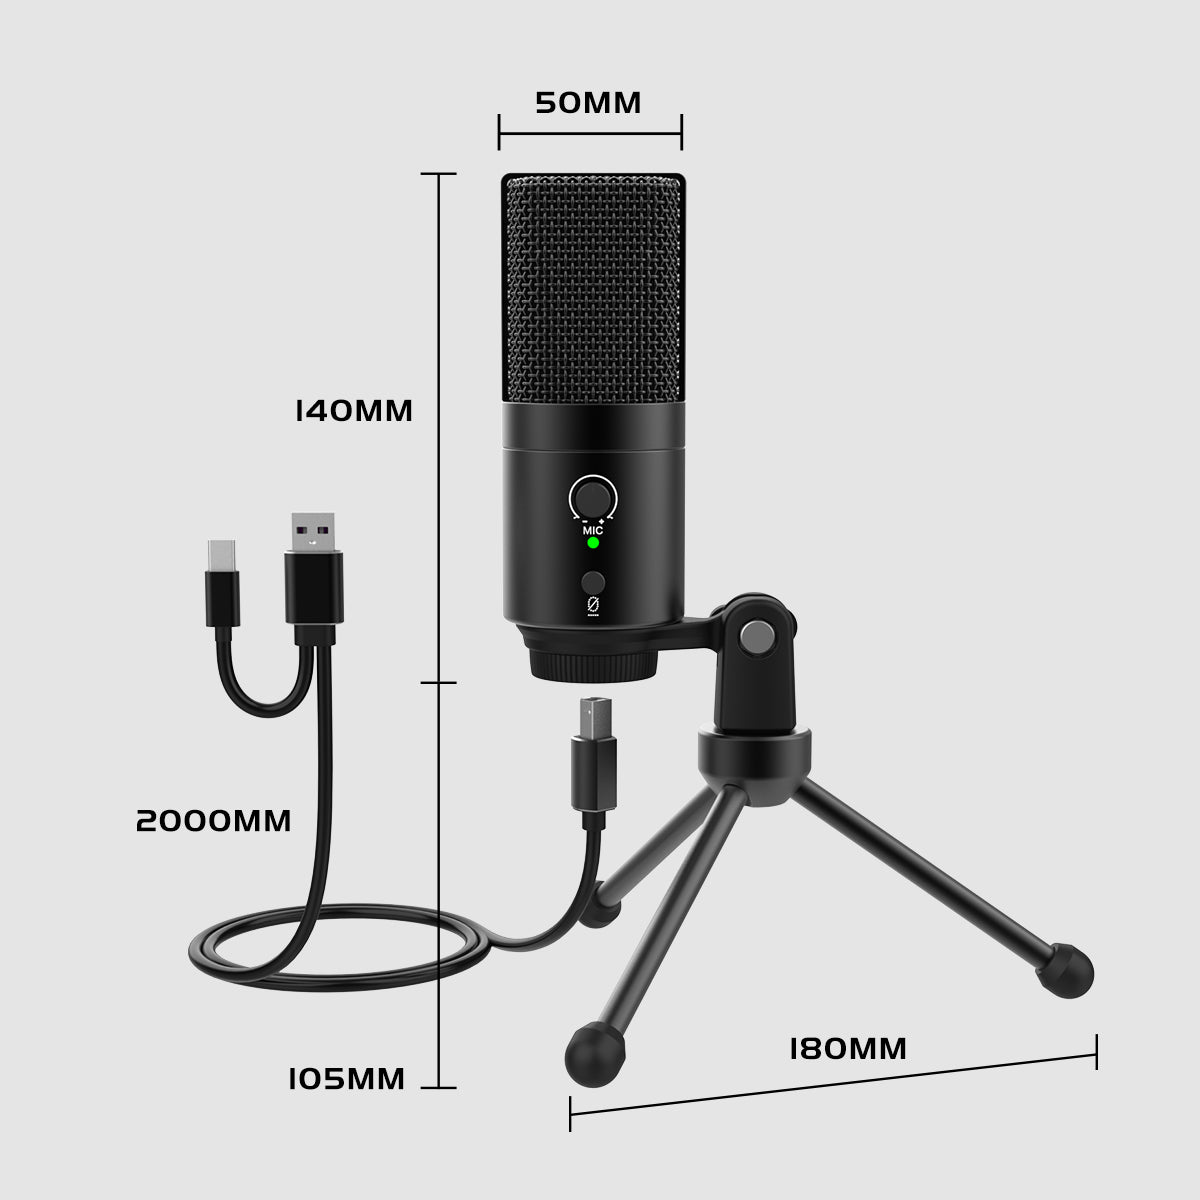 FIFINE T683 USB C&A Gaming Streaming Microphone Kit – vlogsfan